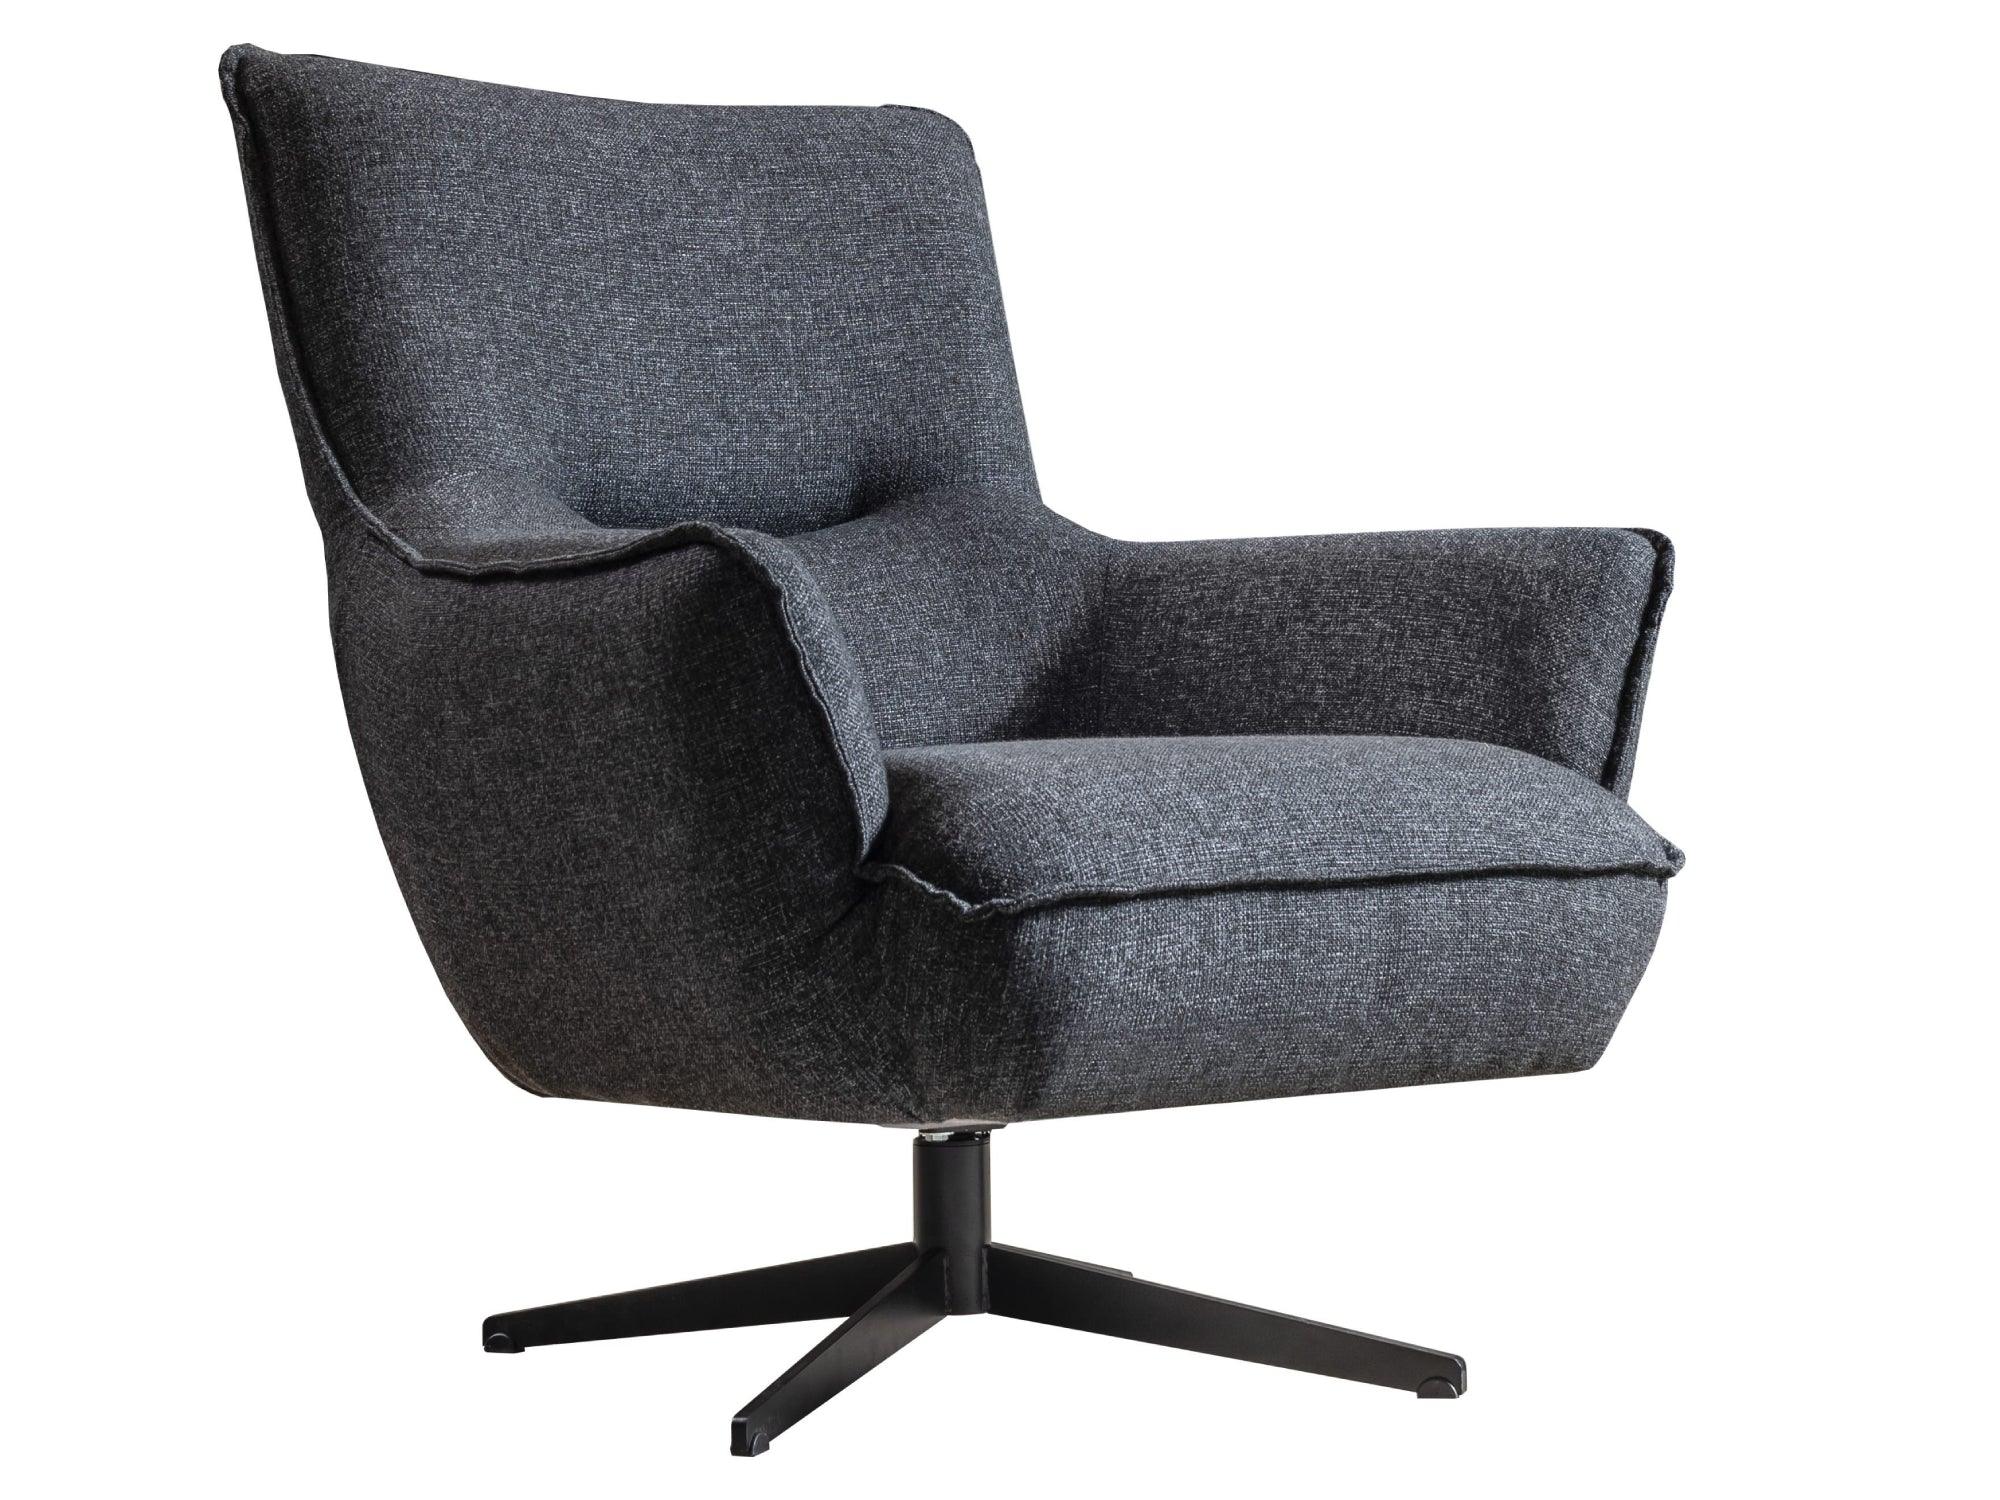 Forrest Swivel Chair Dary Grey - Euro Living Furniture